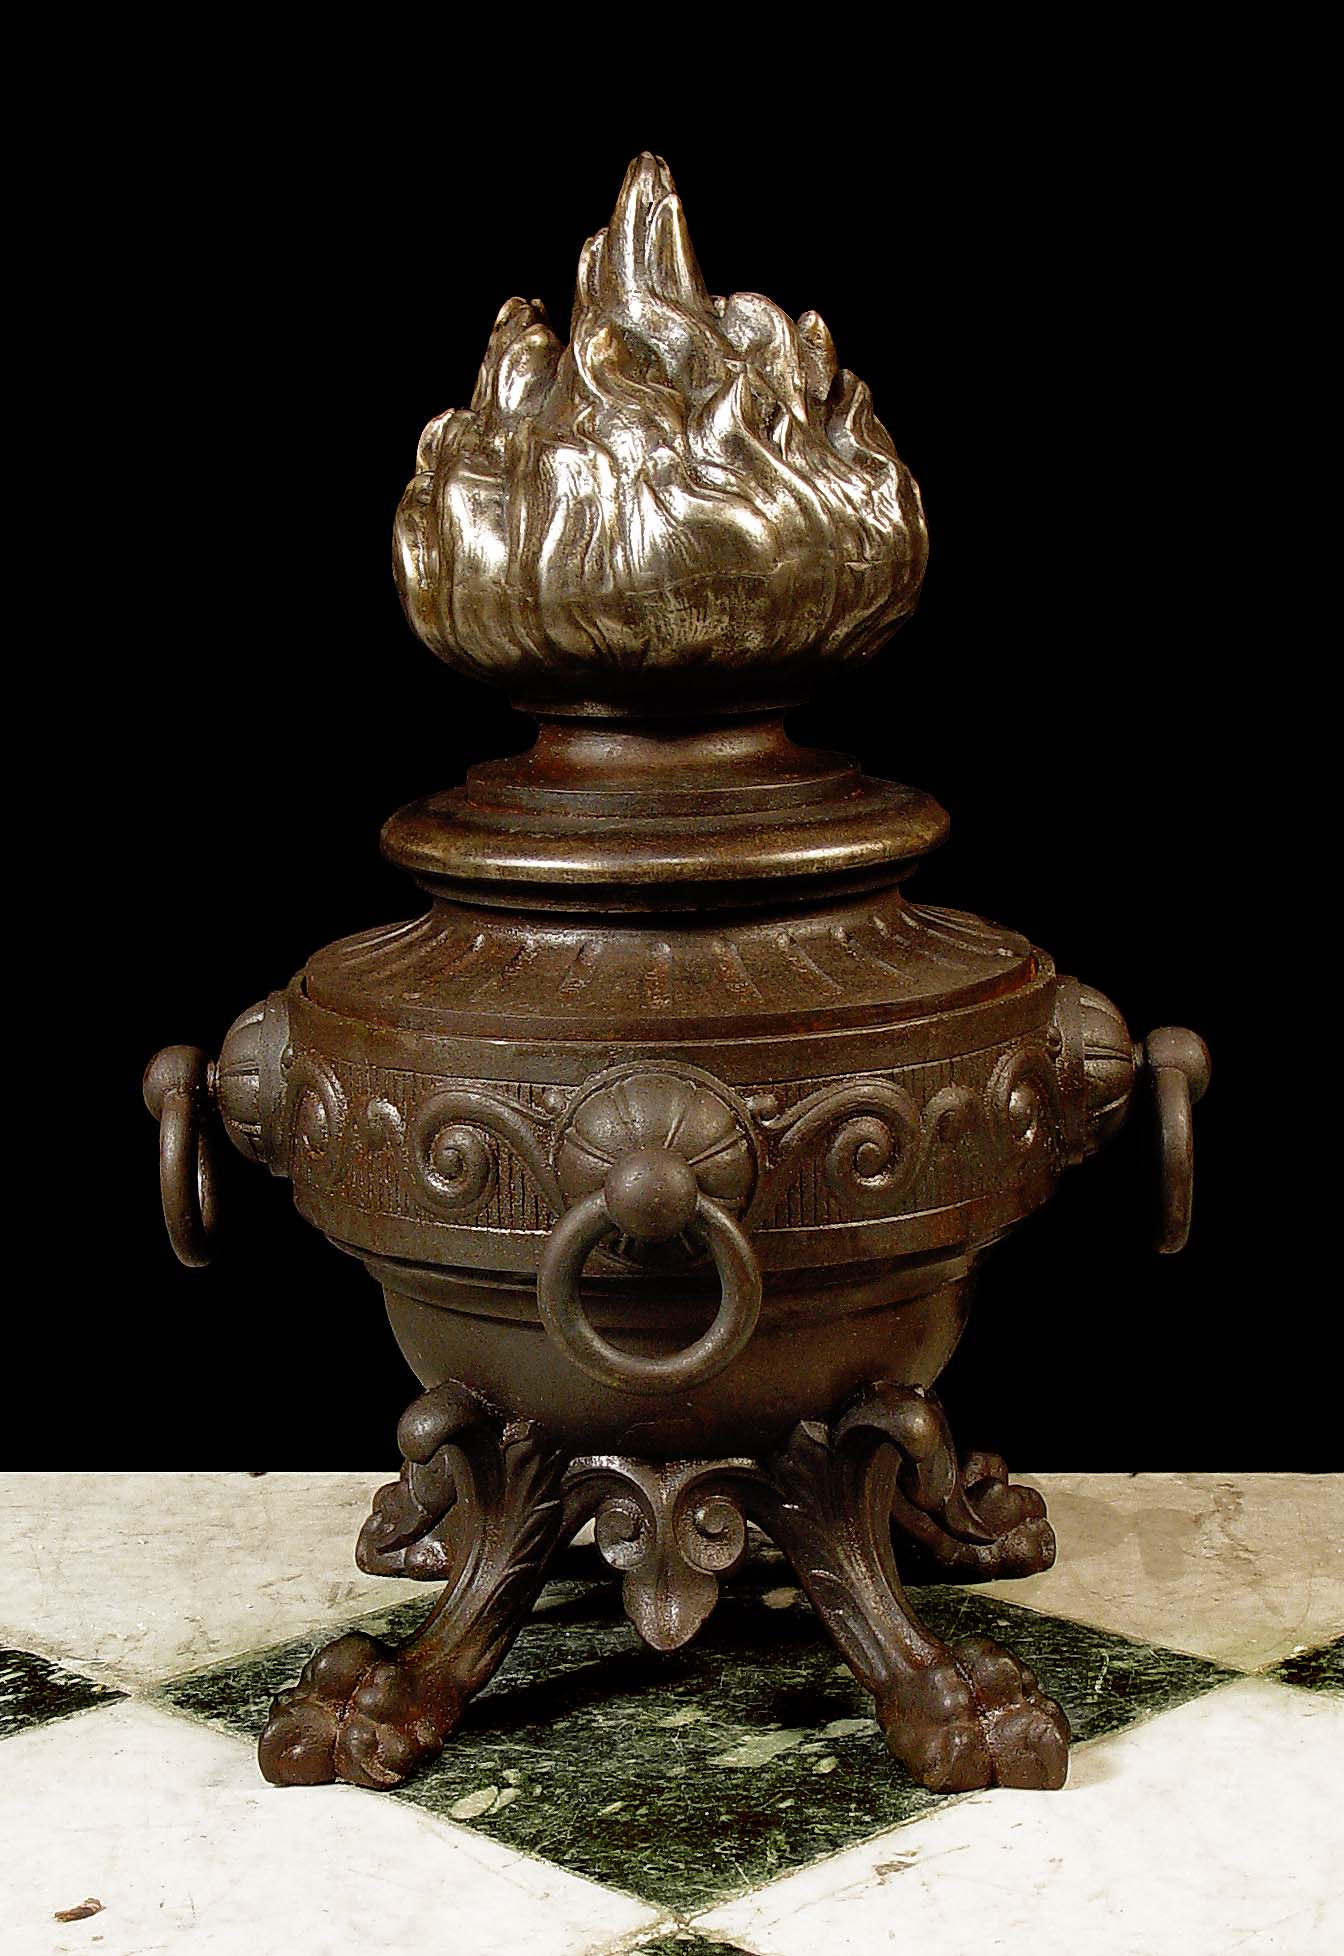  Antique Cast Iron Roman Manner Finial with Torchere decoration
 A large Antique Torchere Finial, Cast in Iron and supported on Lion Paw Feet. In the manner of the Roman Revival, French 19th Century.
